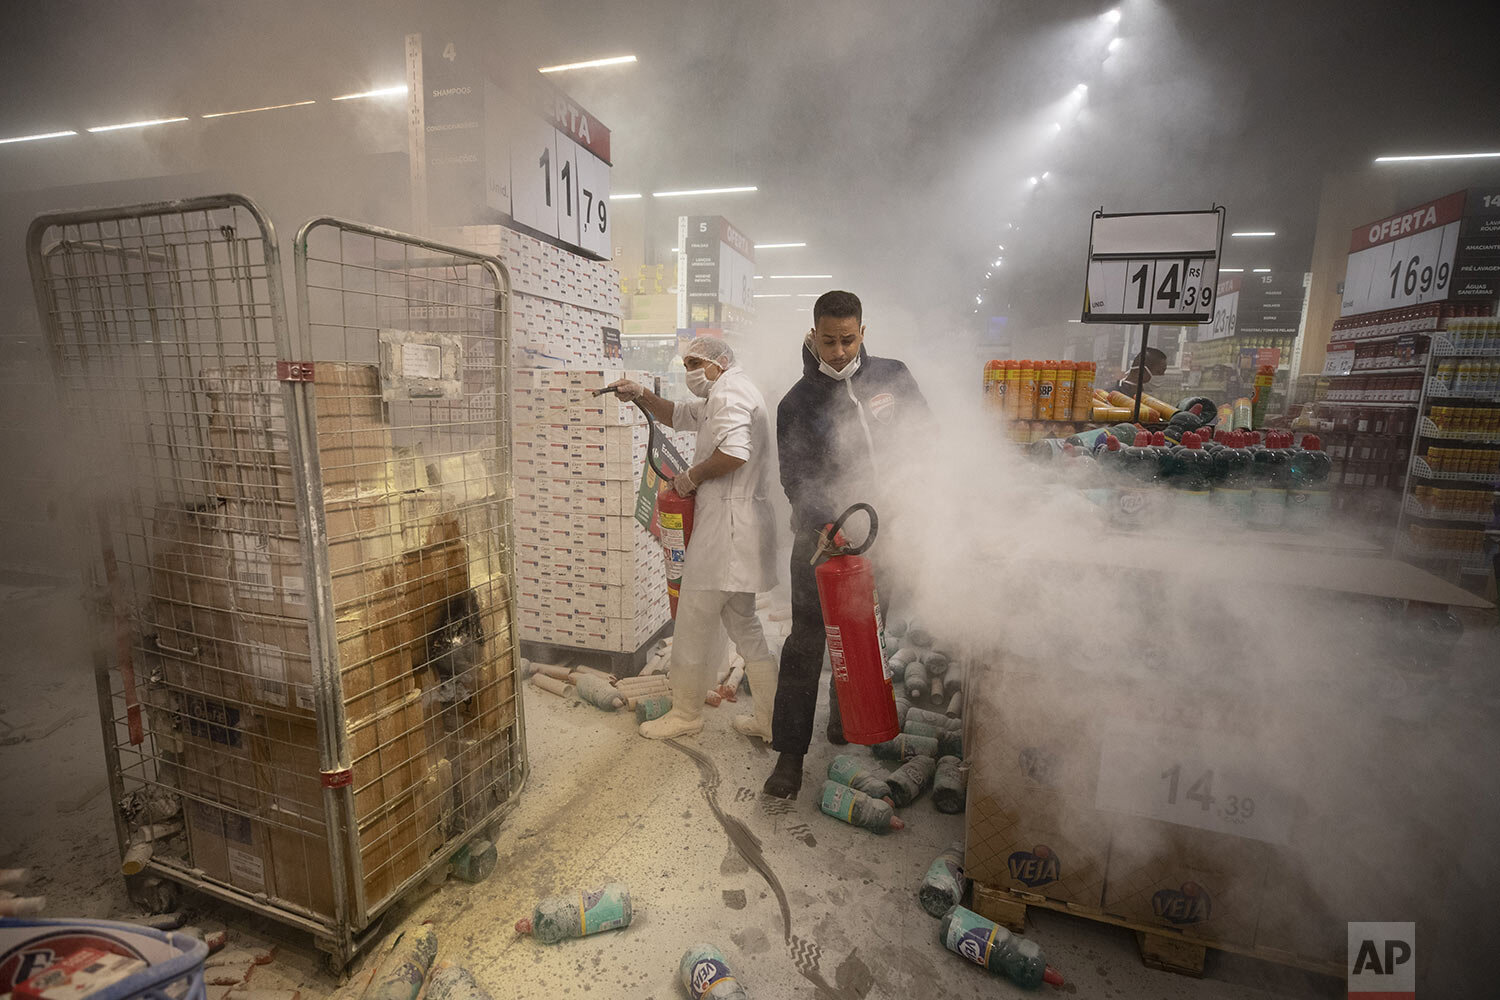  Employees douse a fire set by protesters inside a Carrefour supermarket during a protest against the murder of Black man Joao Alberto Silveira Freitas at a different Carrefour supermarket the night before, in Sao Paulo, Brazil, Friday, Nov. 20, 2020